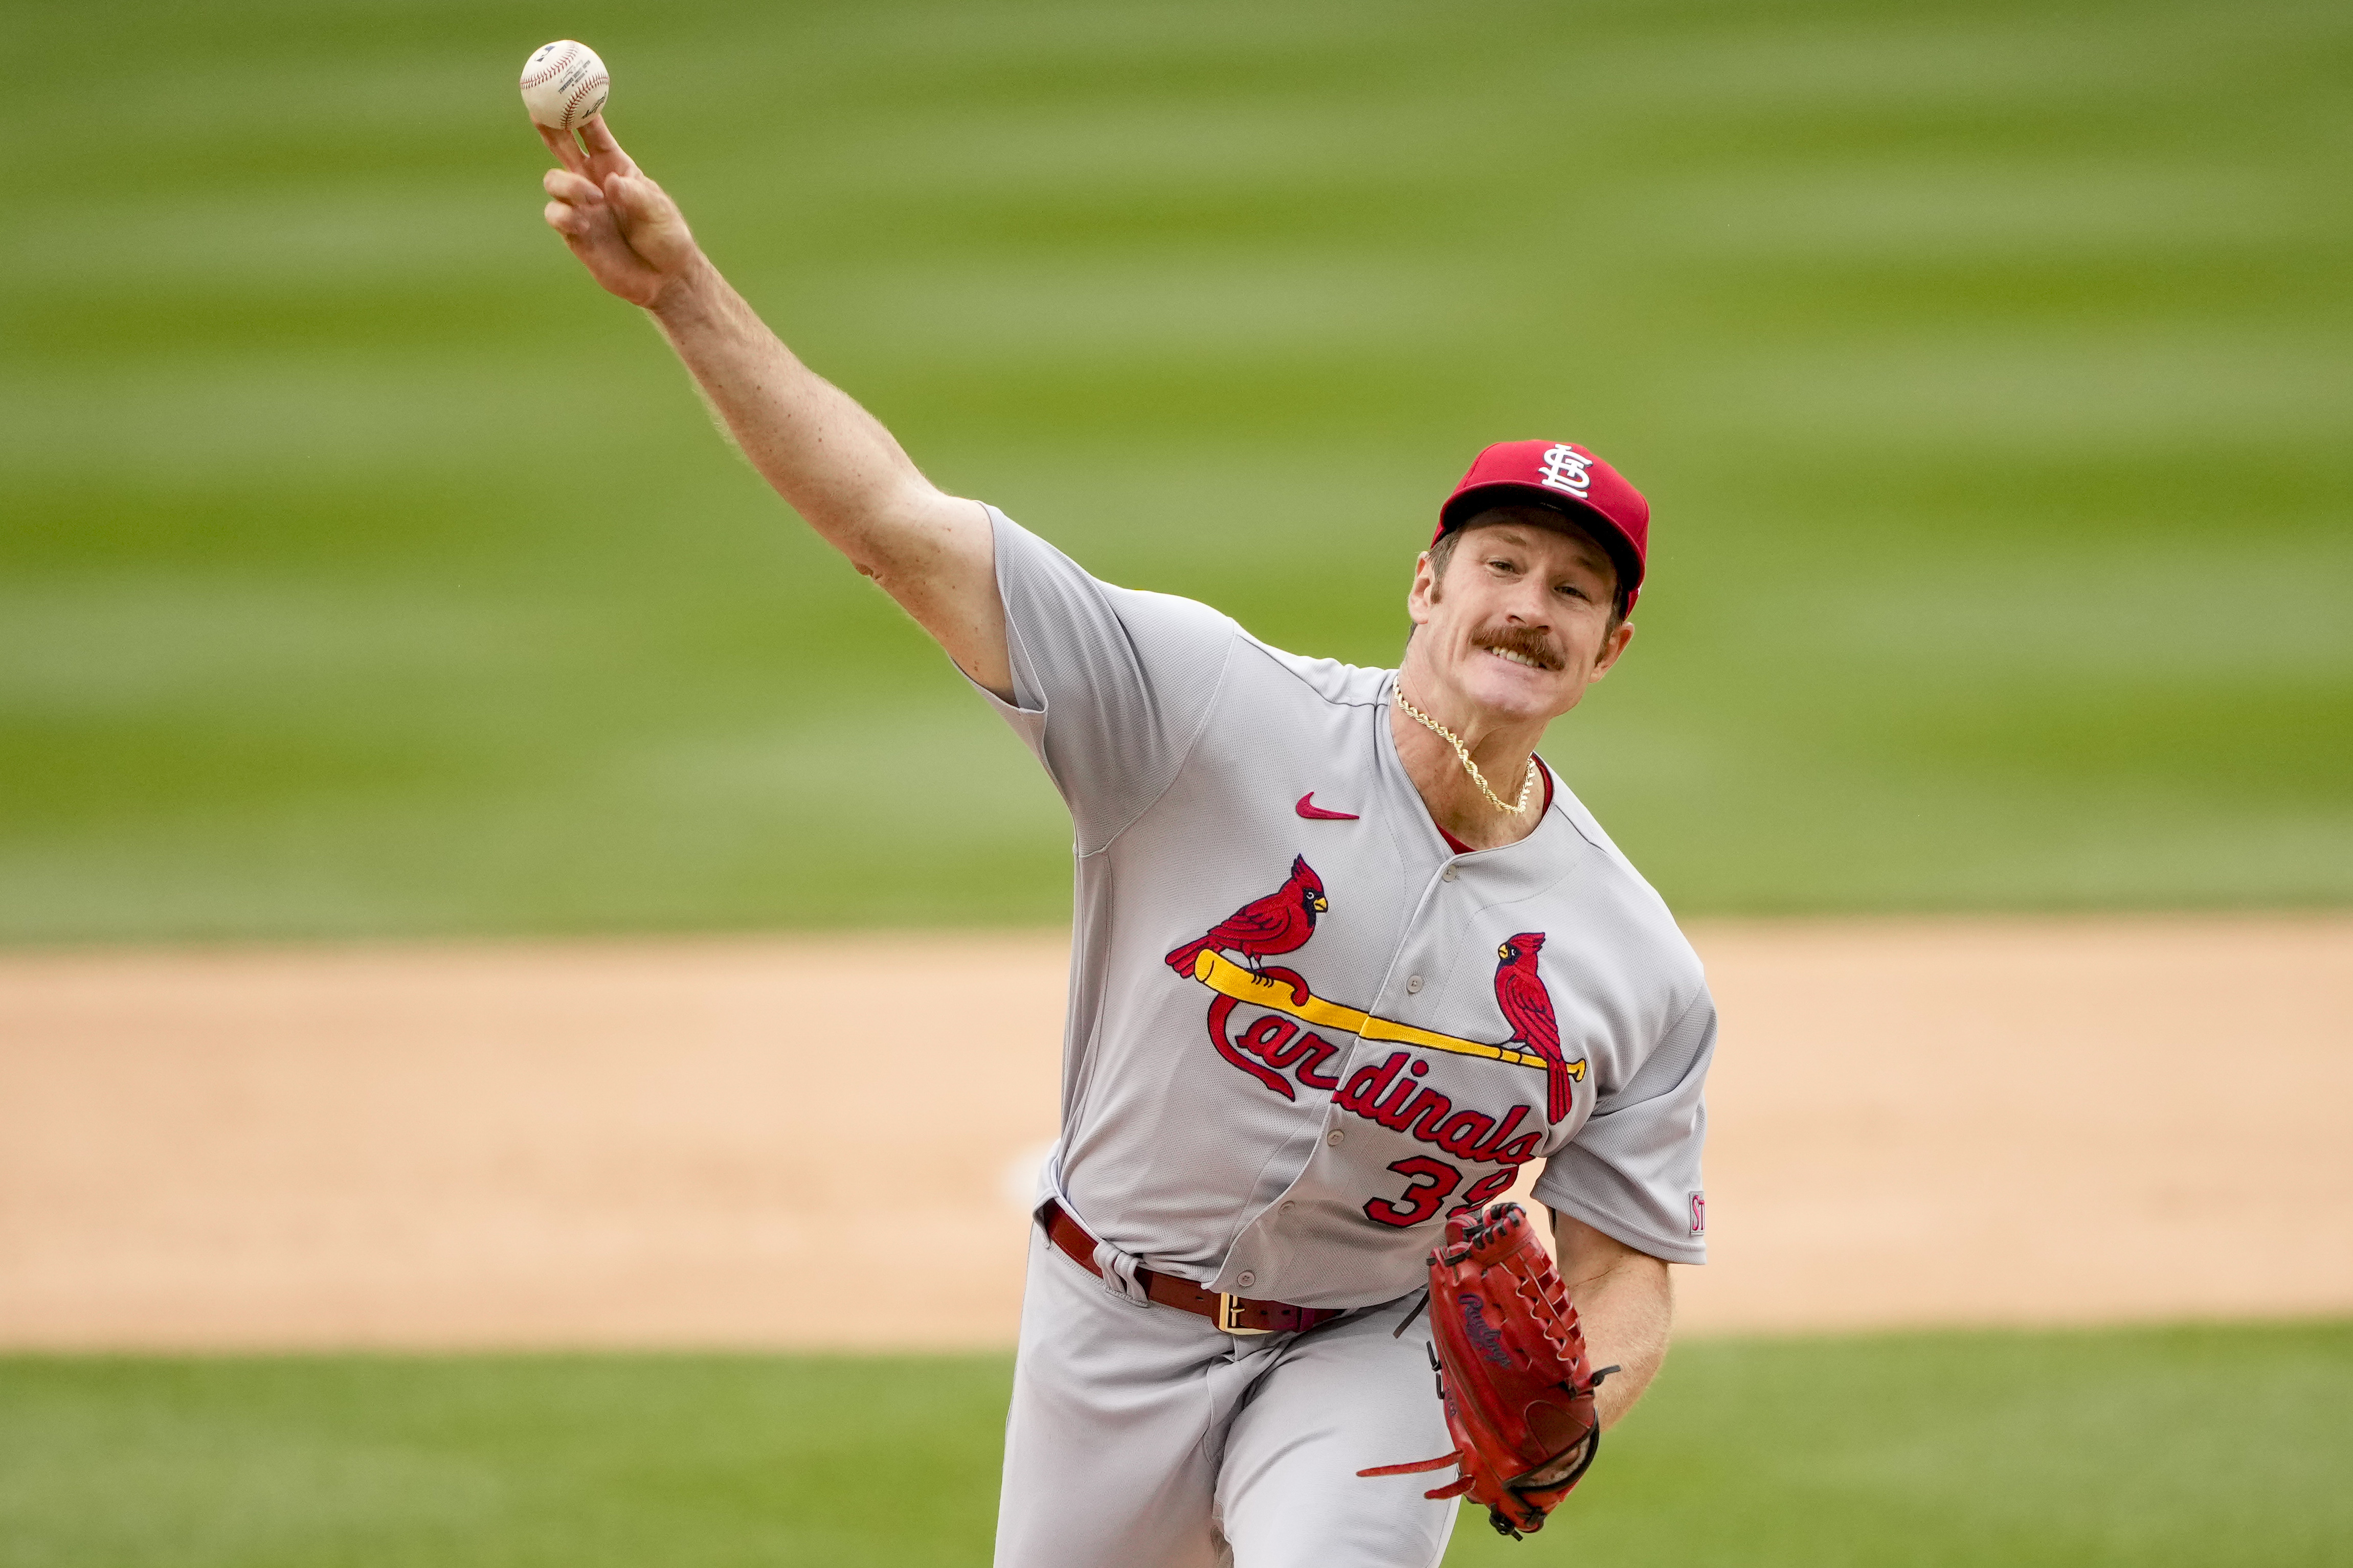 Cardinals pitcher Miles Mikolas reacts to ejection over throwing